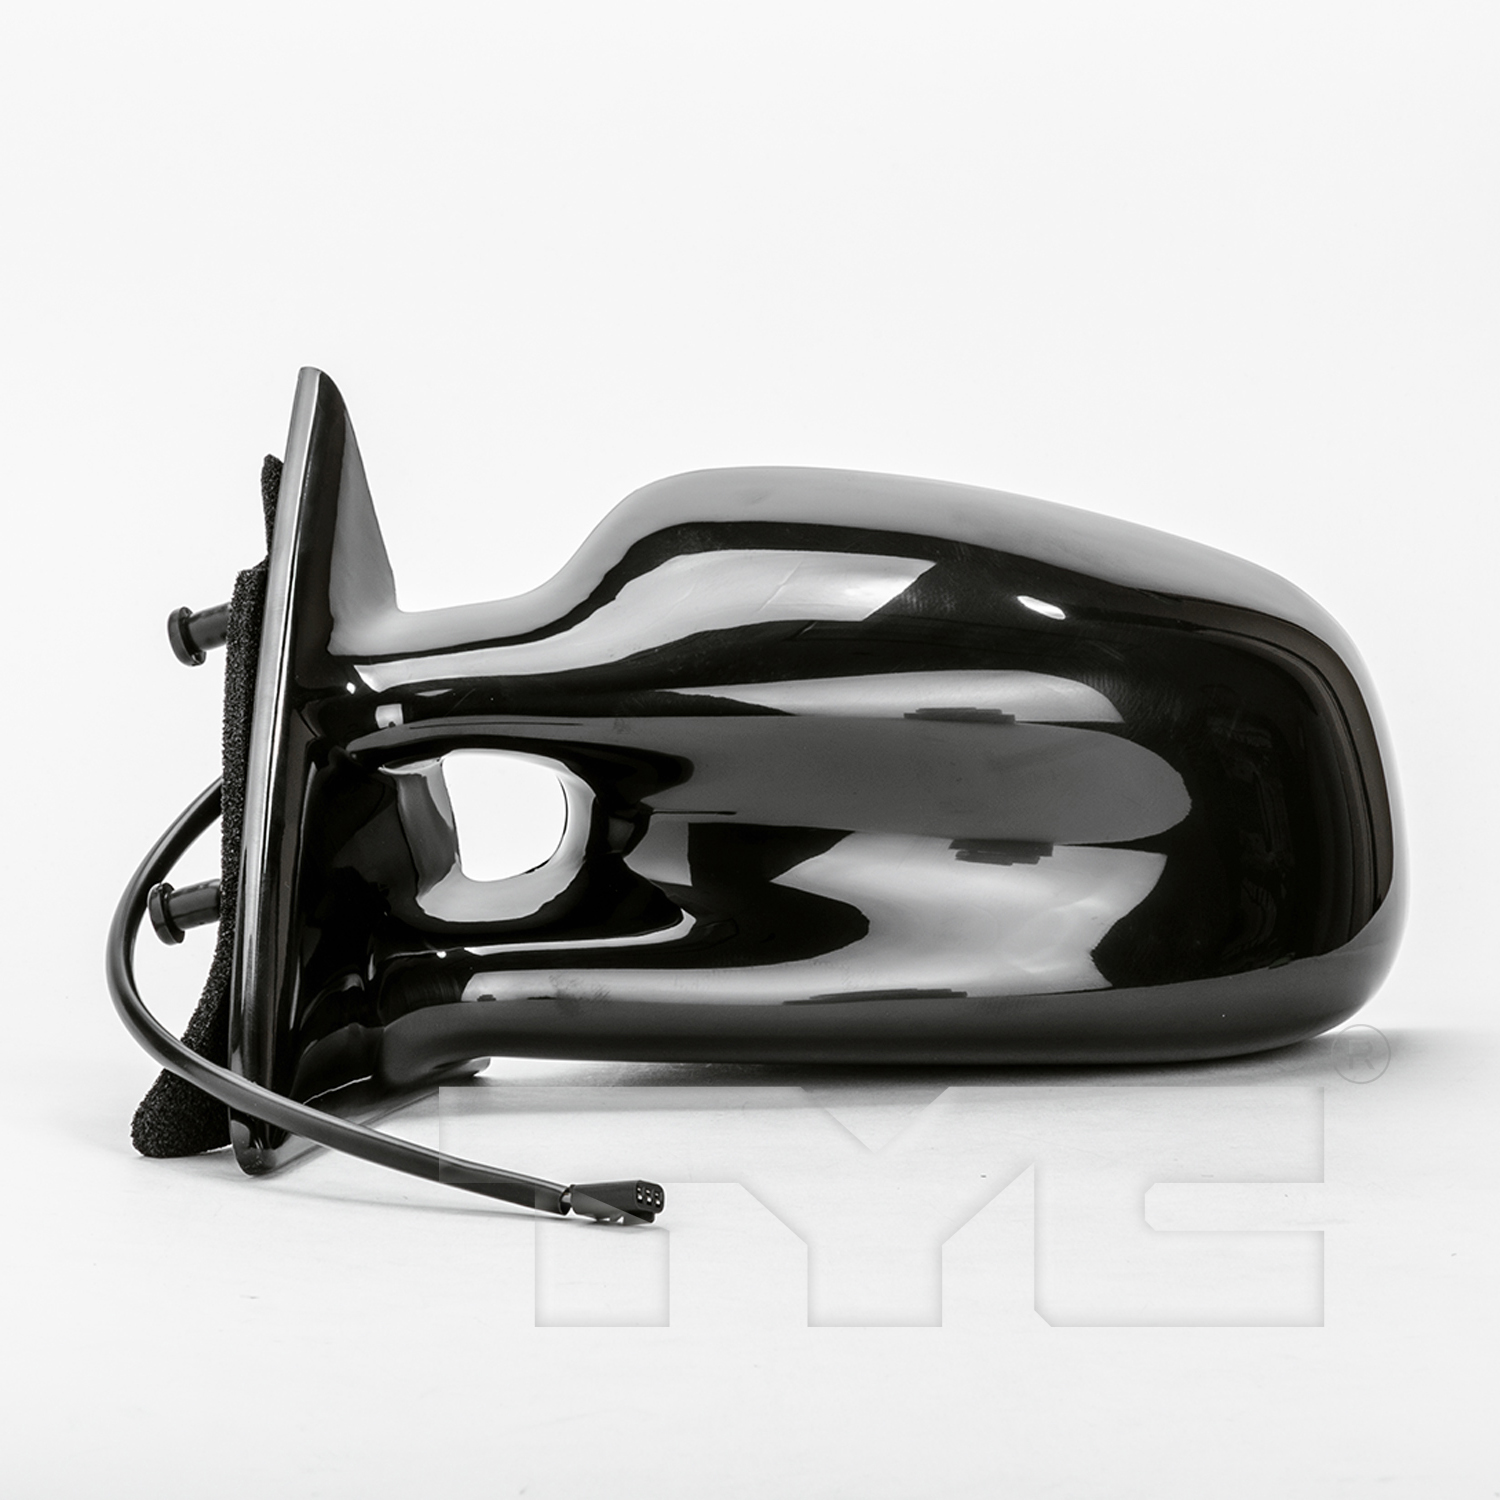 Aftermarket MIRRORS for PONTIAC - GRAND AM, GRAND AM,99-01,LT Mirror outside rear view